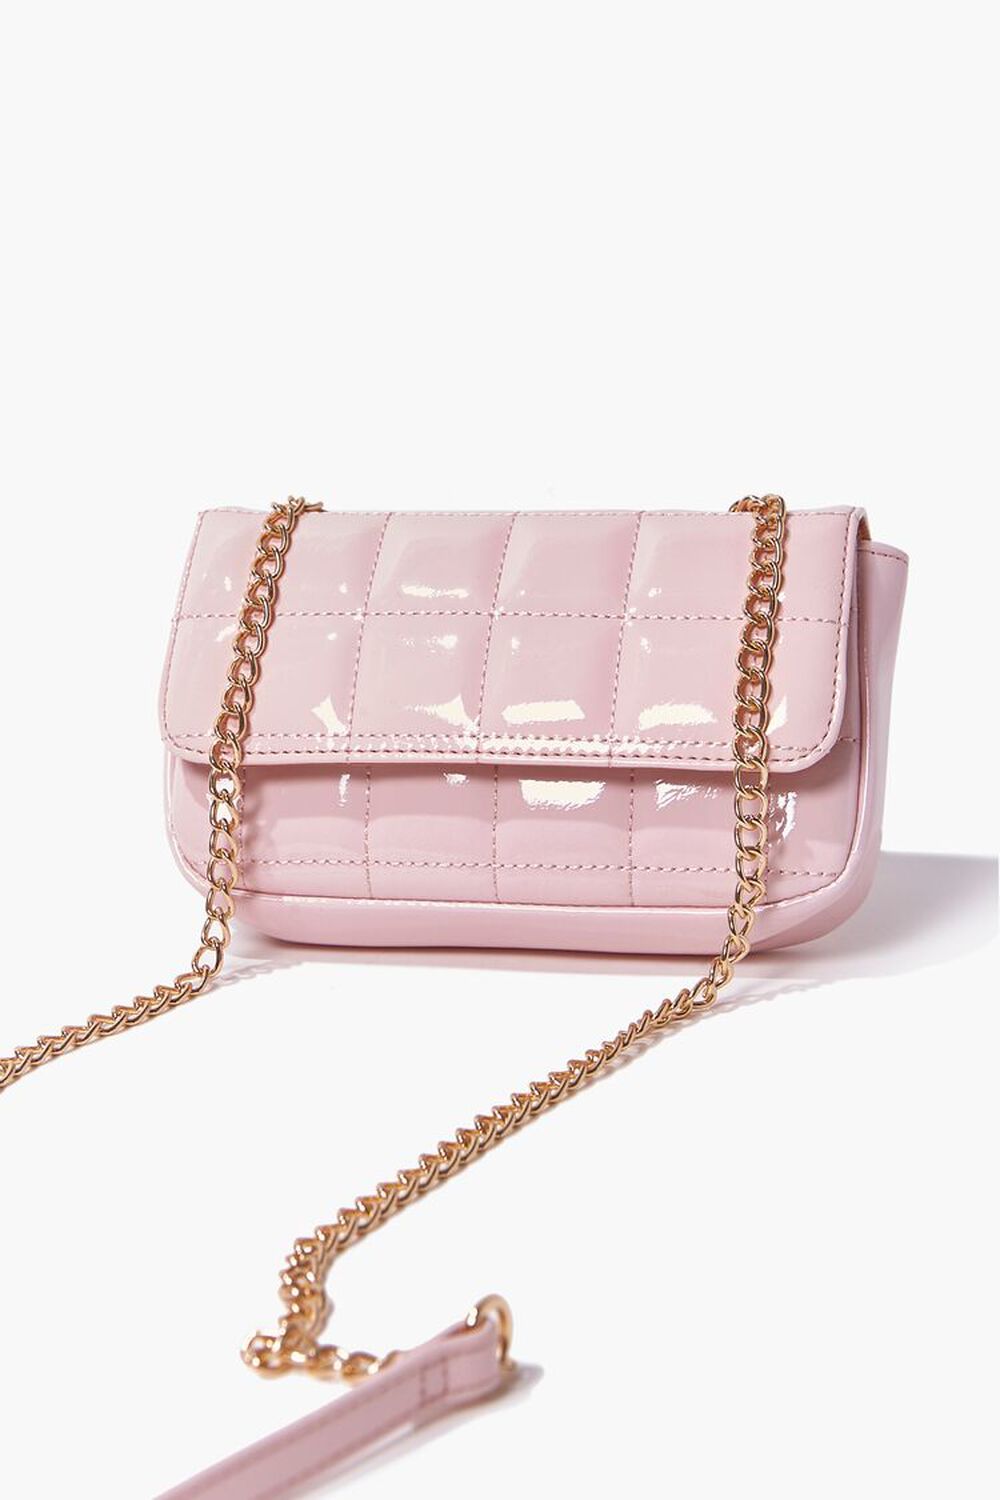 PINK Quilted Chain Crossbody Bag, image 1